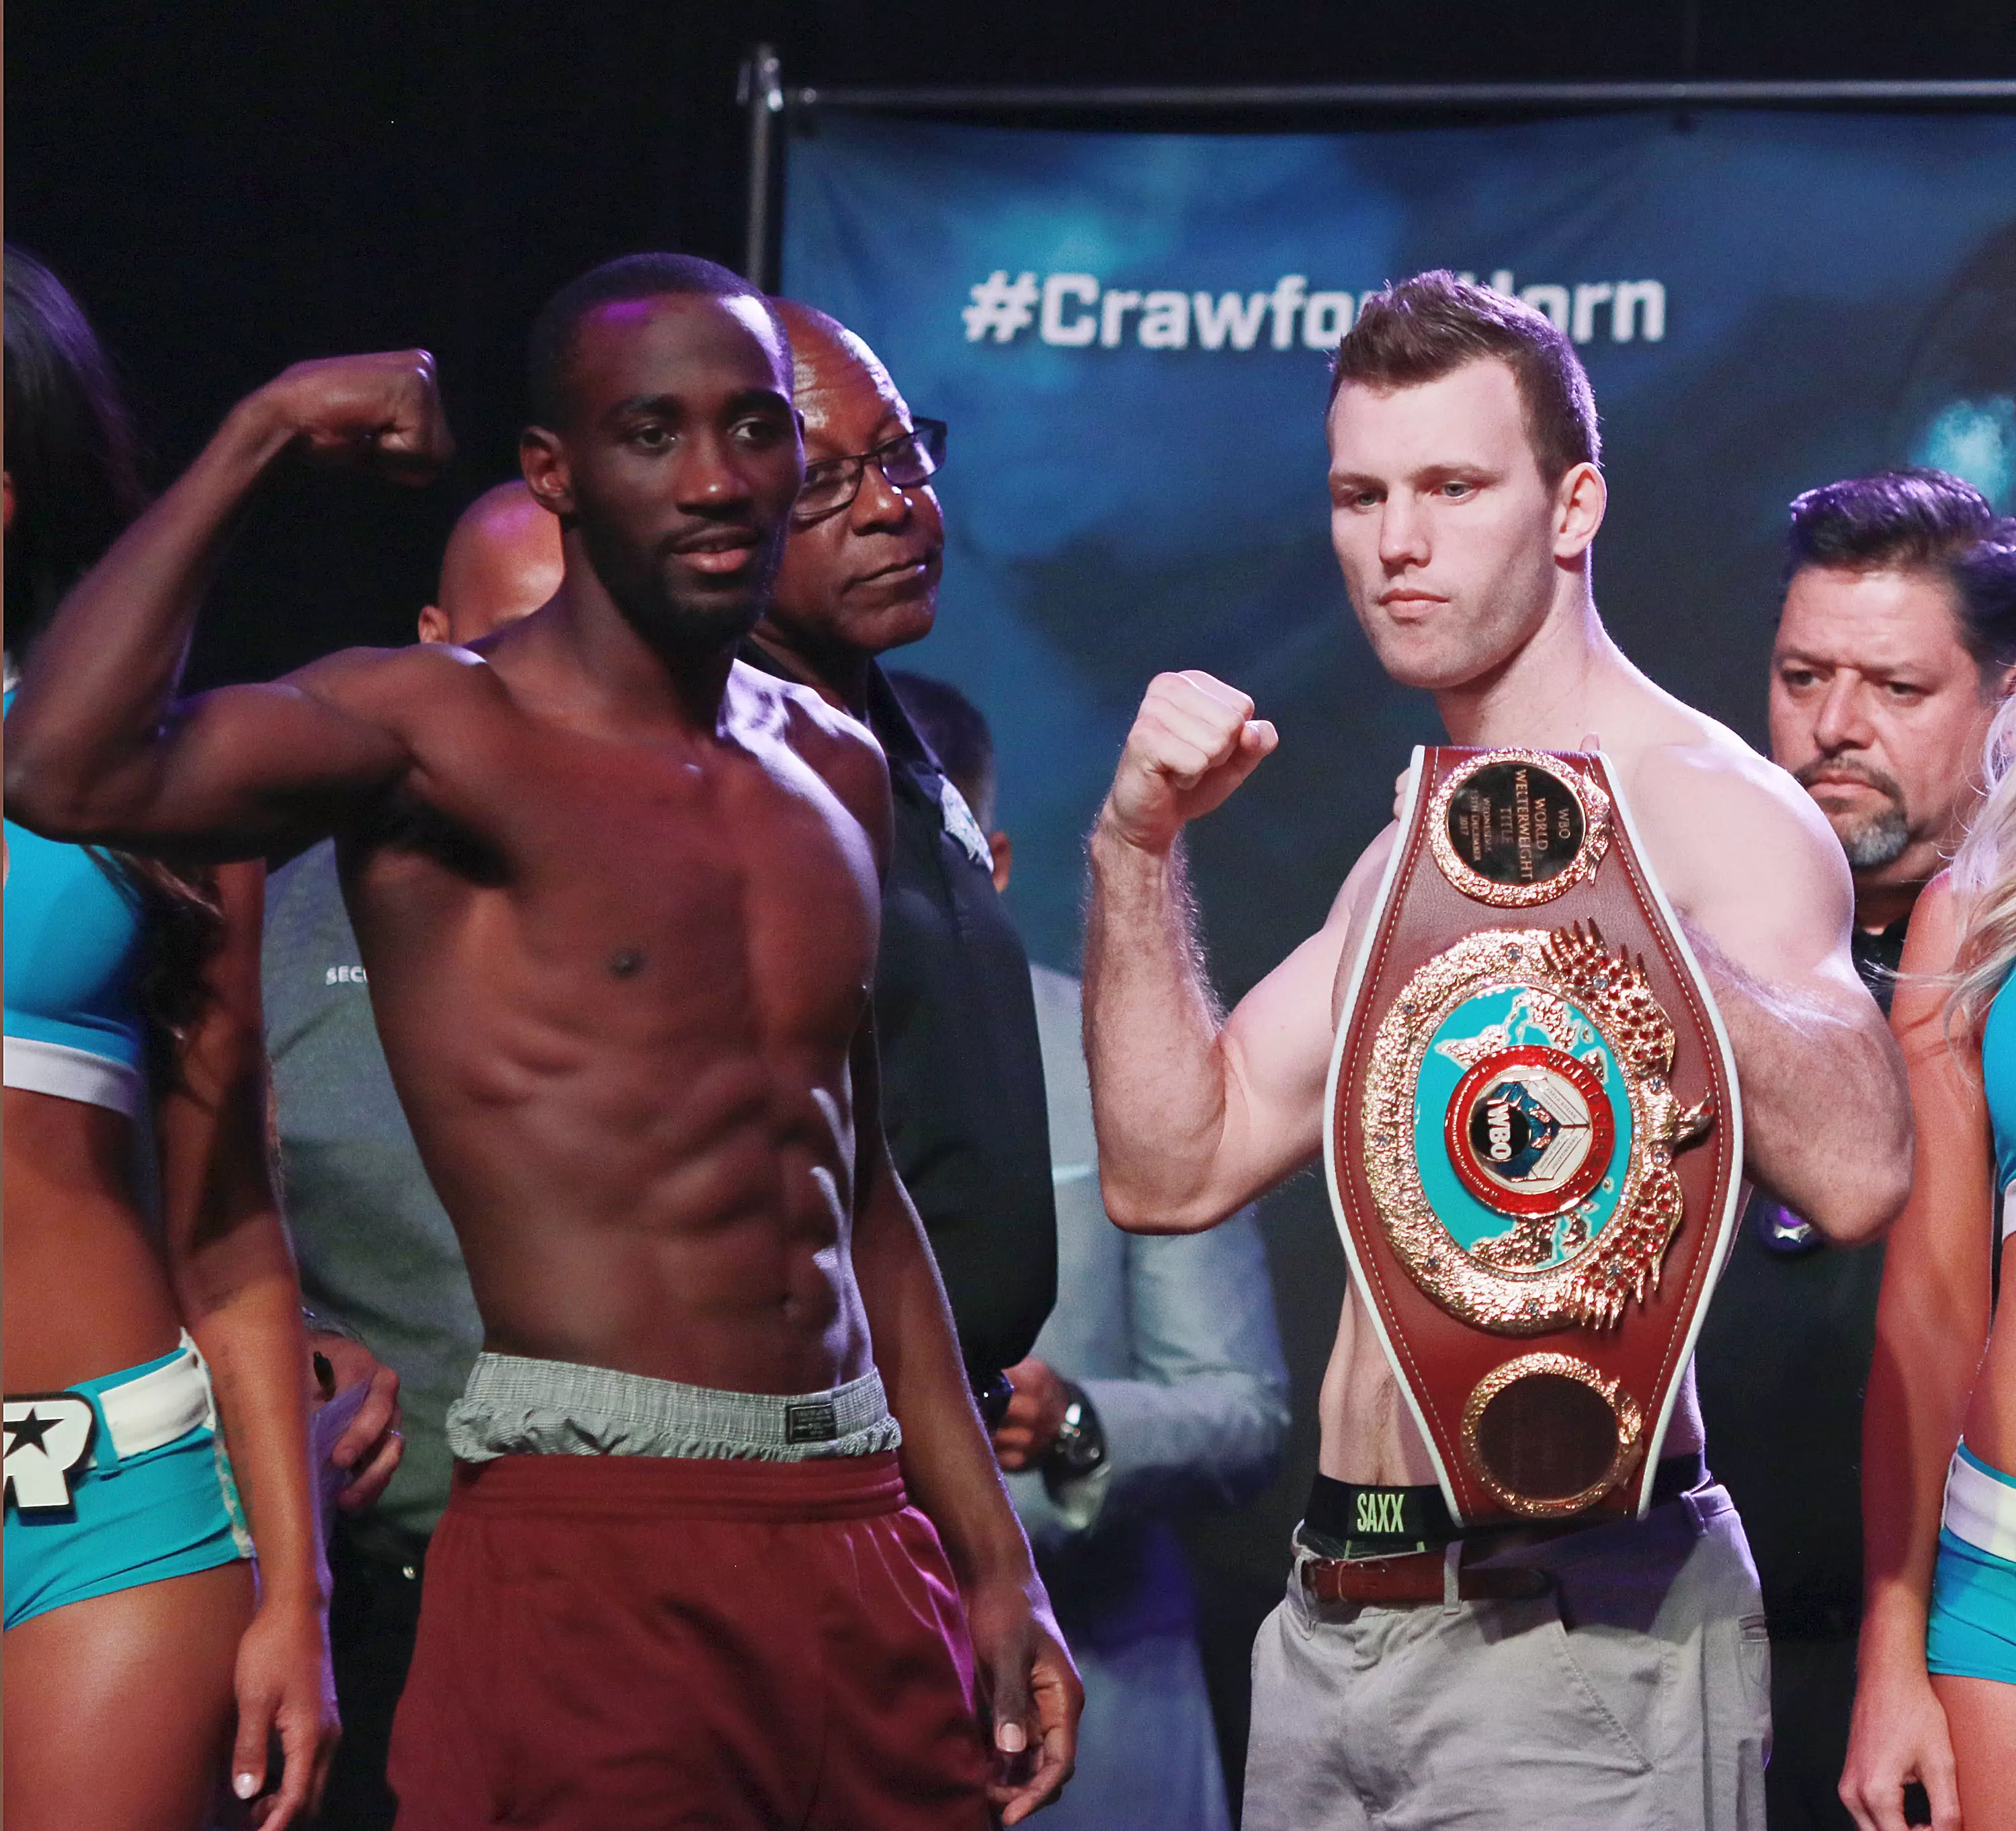 Horn lost his WBO welterweight title to Terrence Crawford in 2018.